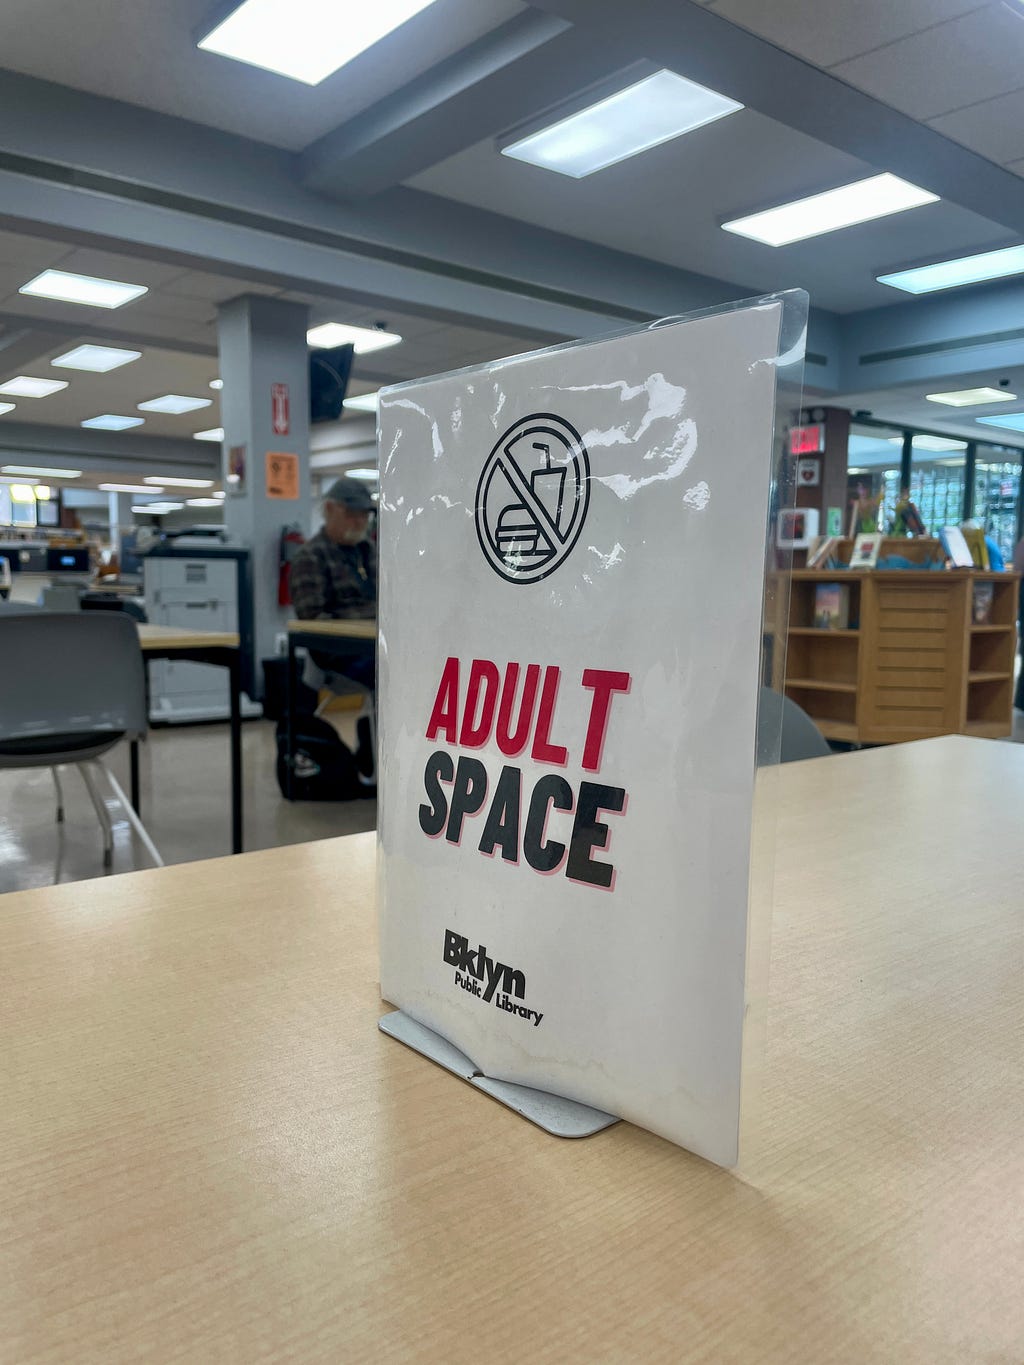 sign reading “adult space” on a table at the brooklyn library